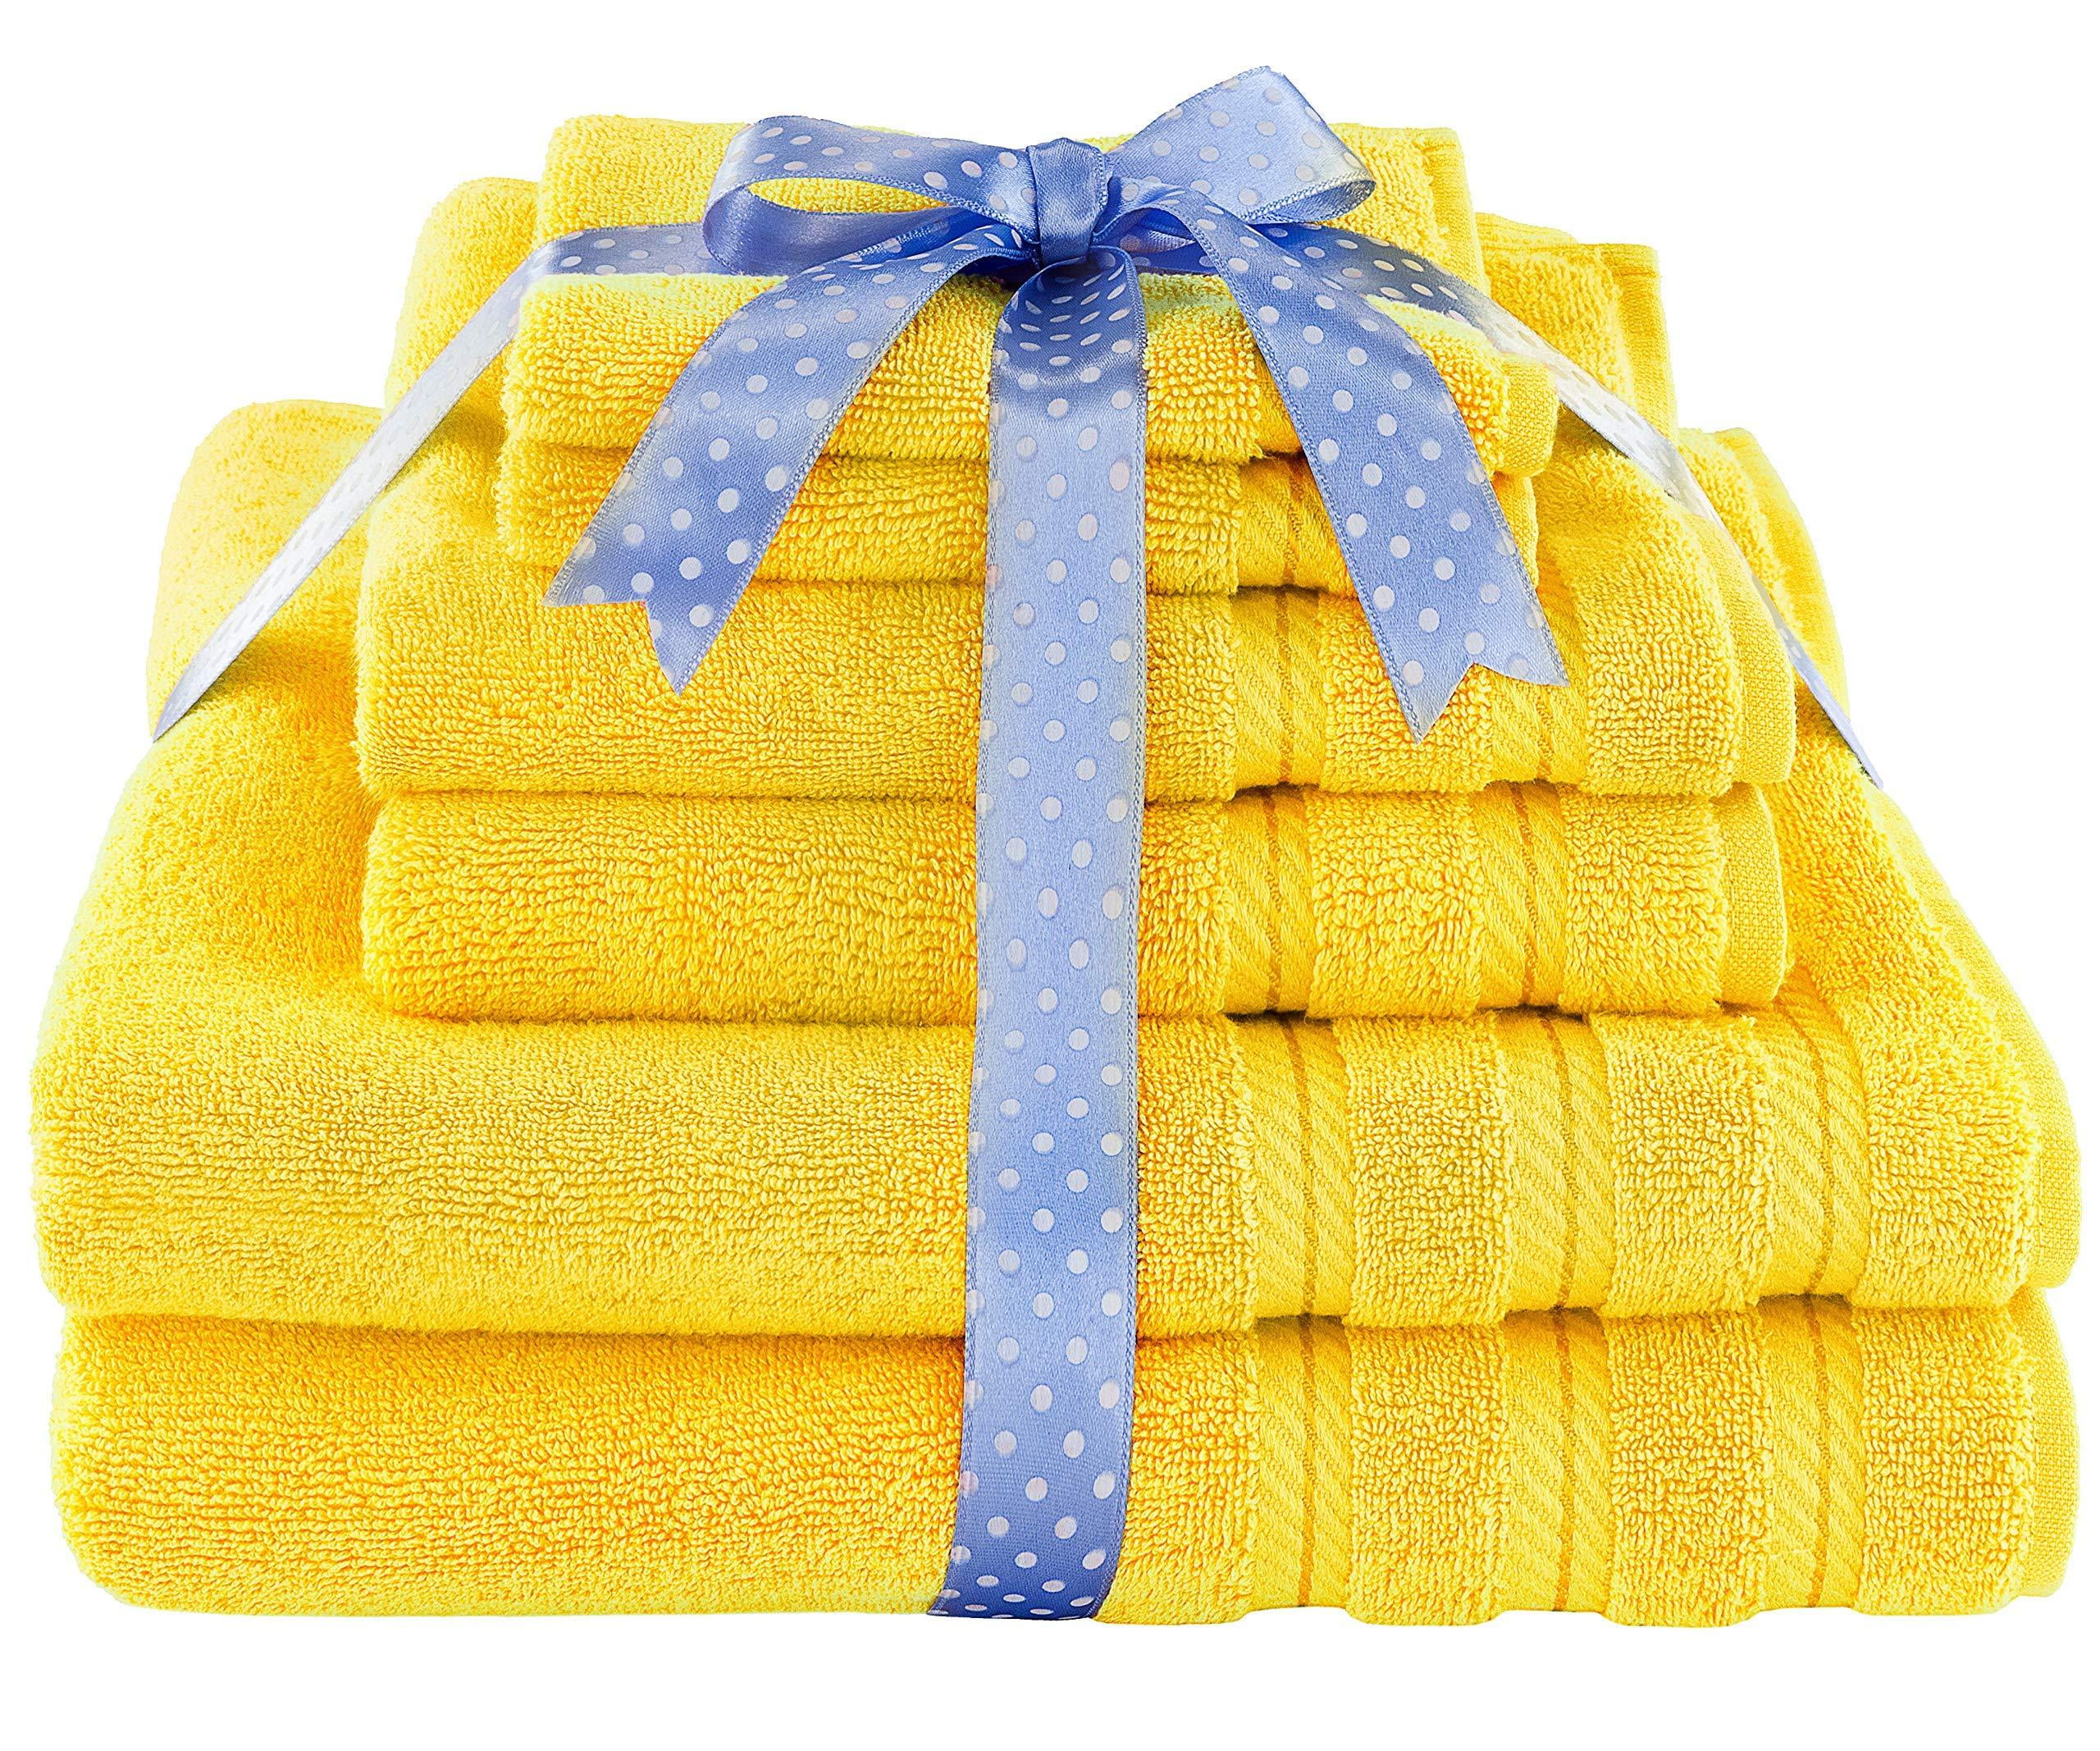 Yellow Towels for Bathroom, Luxury 6PCS Gift Set, 100% Cotton | Thick |  Soft | Quick Dry, 2 Large Bath Towels 30 × 56, 2 Hand Towels 18 × 28, 2